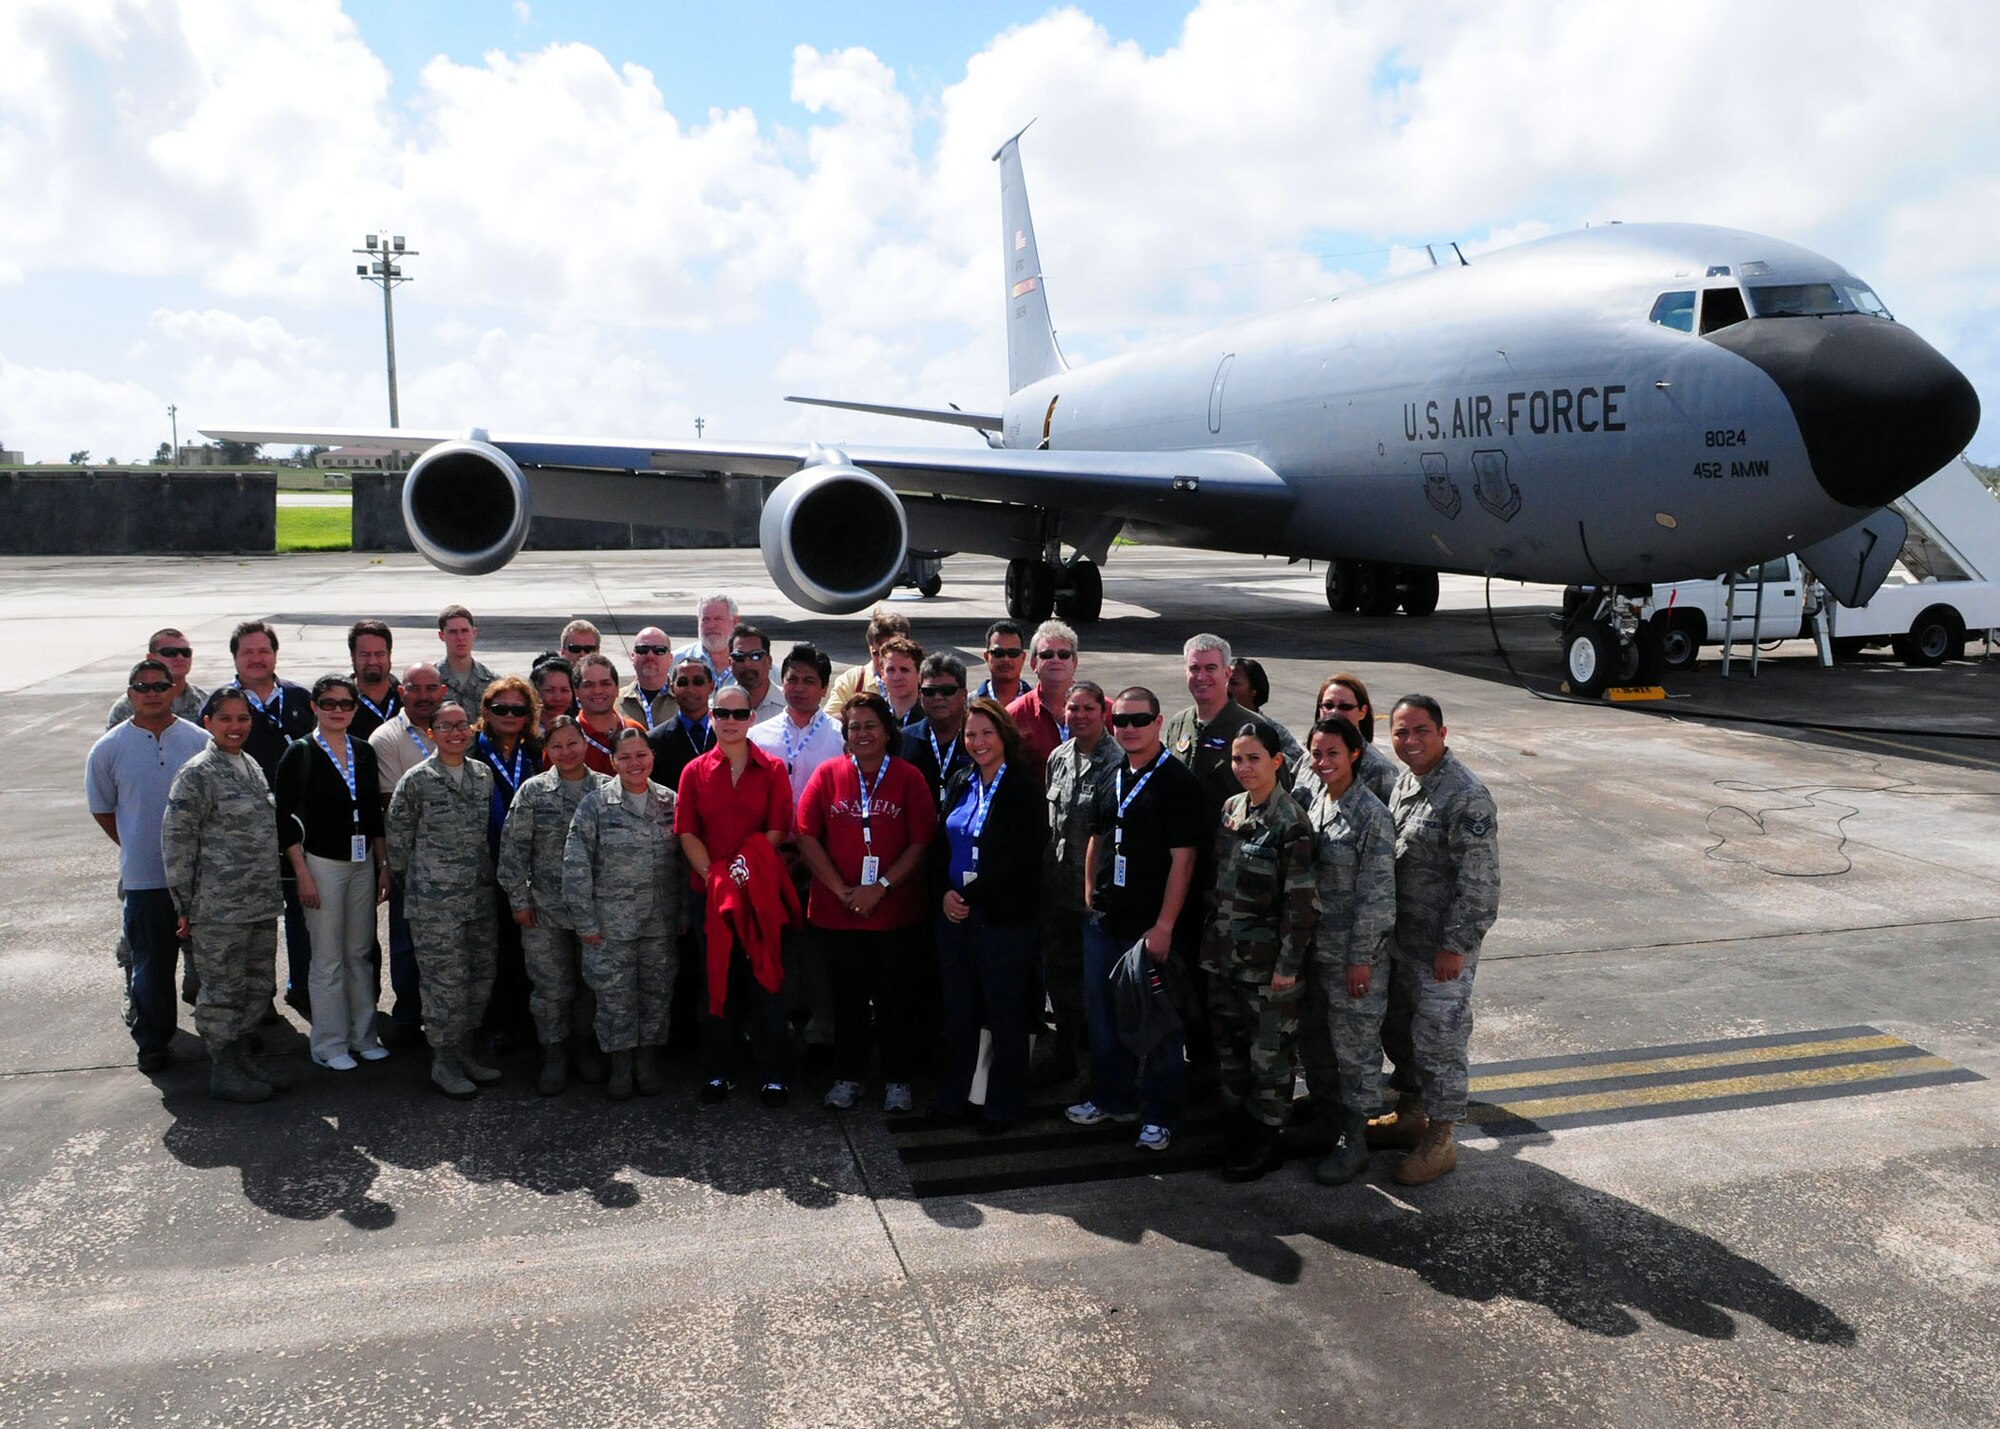 ANDERSEN AIR FORCE BASE, Guam - Guam local business leaders, Reservists, and Guardsmen stop and pose for a group photo before boarding the KC-135 at Andersen AFB, Nov. 13 during the 624th Regional Support Group Employer Support Flight. While aboard the training mission, the group received an up-close view of the tanker refueling a B-52 Stratofortress over the waters of the Pacific Ocean. The event marked an outreach effort by the 624th Regional Support Group, the largest Air Force Reserve presence in the Pacific, to educate the Reservists' civilian employers on what these citizen airmen do when fulfilling their Air Force Reserve duties. (U.S. Air Force photo by Airman 1st Class Courtney Witt)